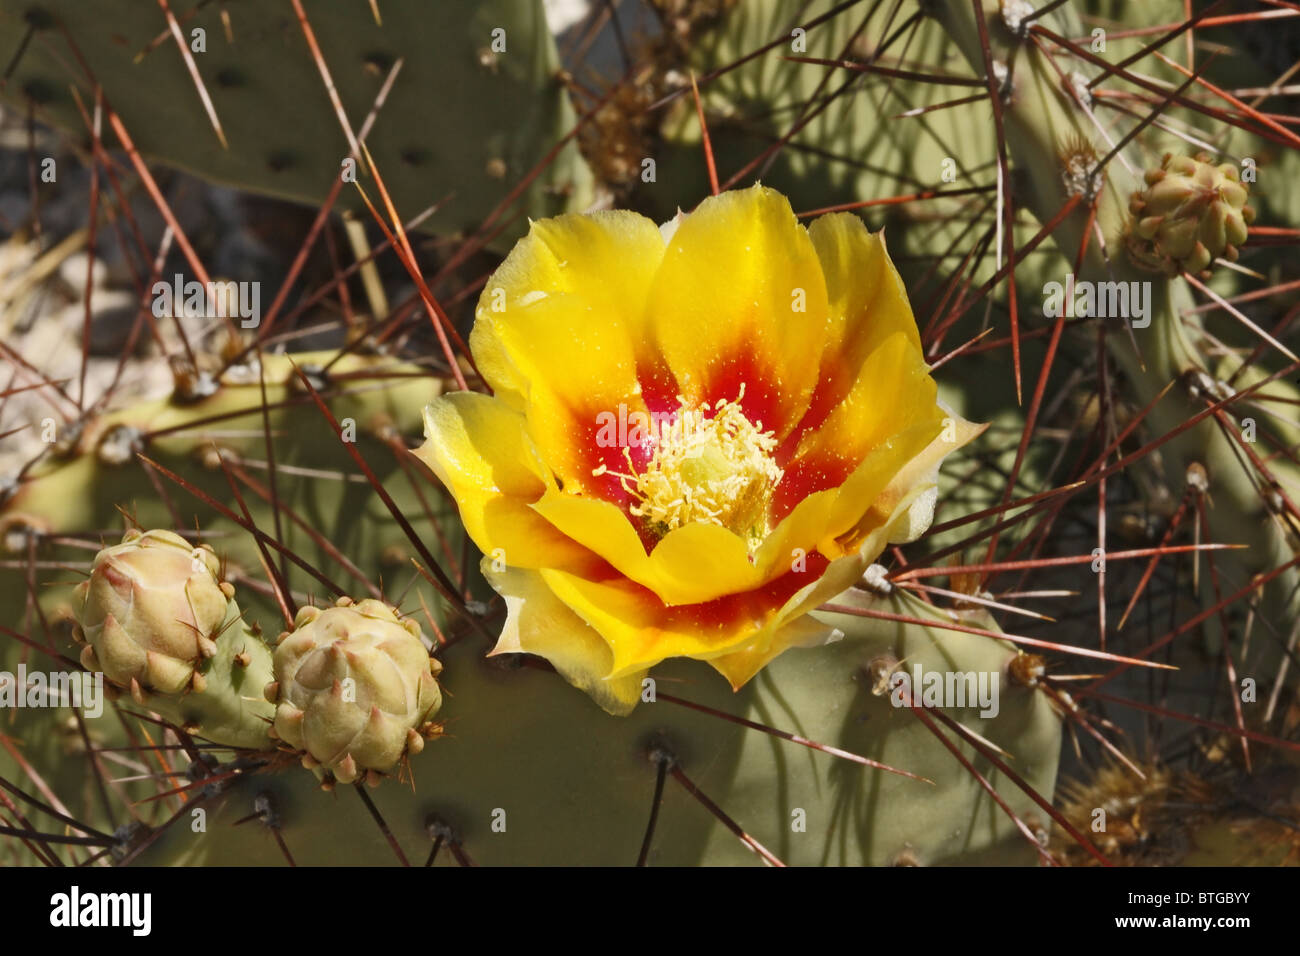 Brown spine Prickly Pear flower Stock Photo